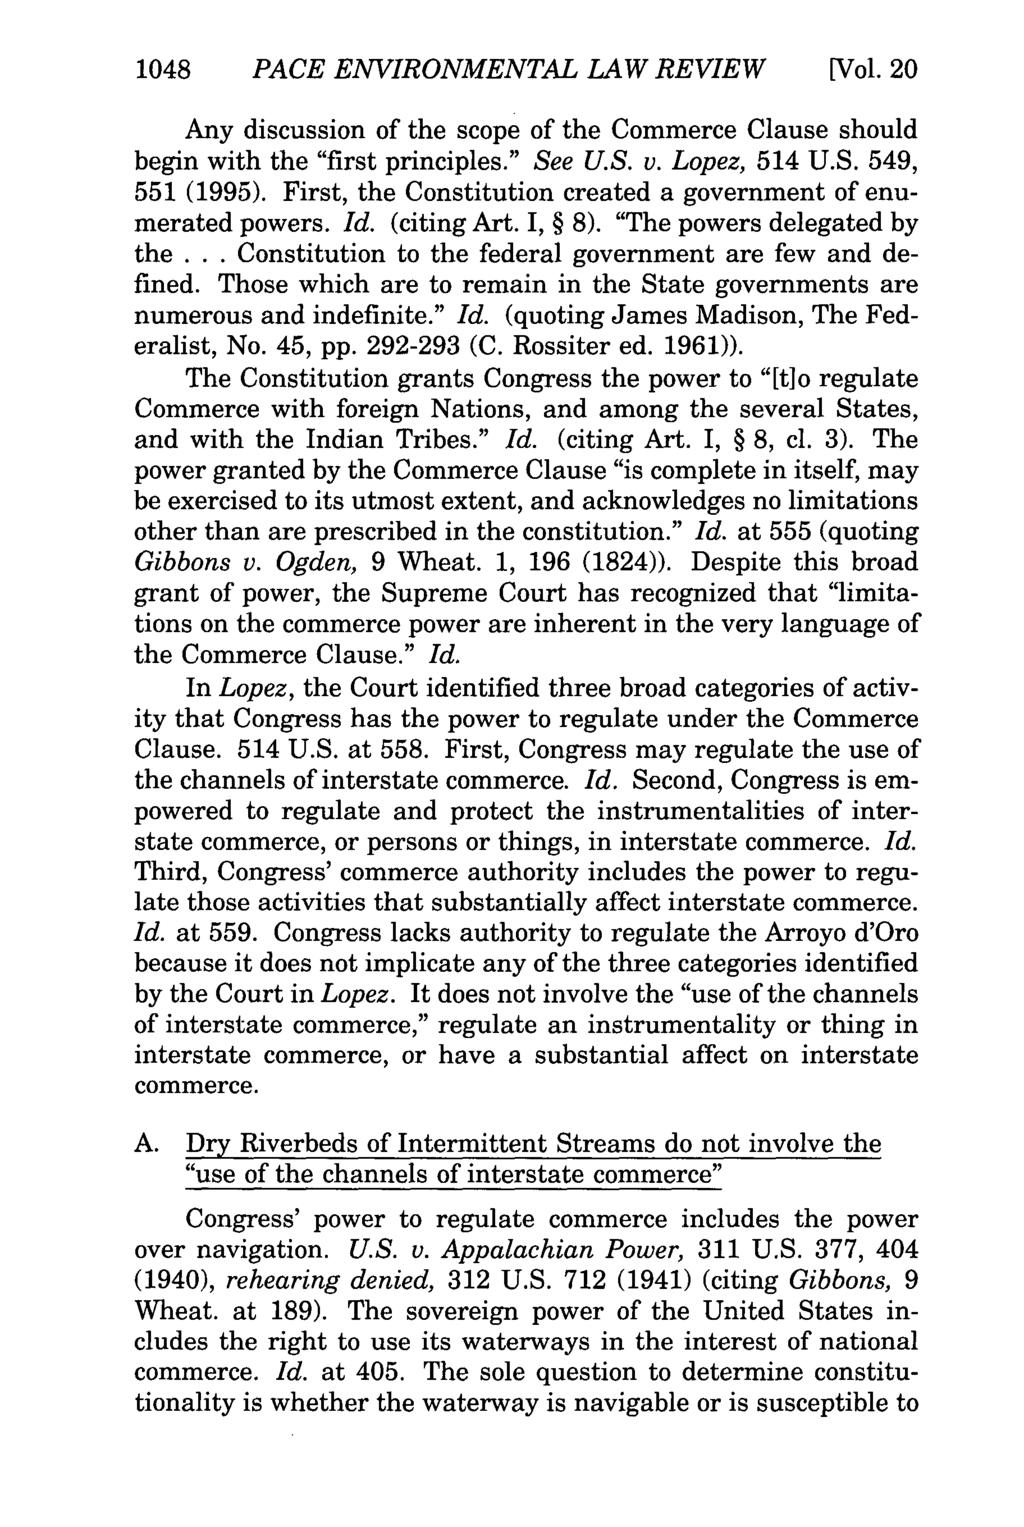 1048 PACE ENVIRONMENTAL LAW REVIEW [Vol. 20 Any discussion of the scope of the Commerce Clause should begin with the "first principles." See U.S. v. Lopez, 514 U.S. 549, 551 (1995).